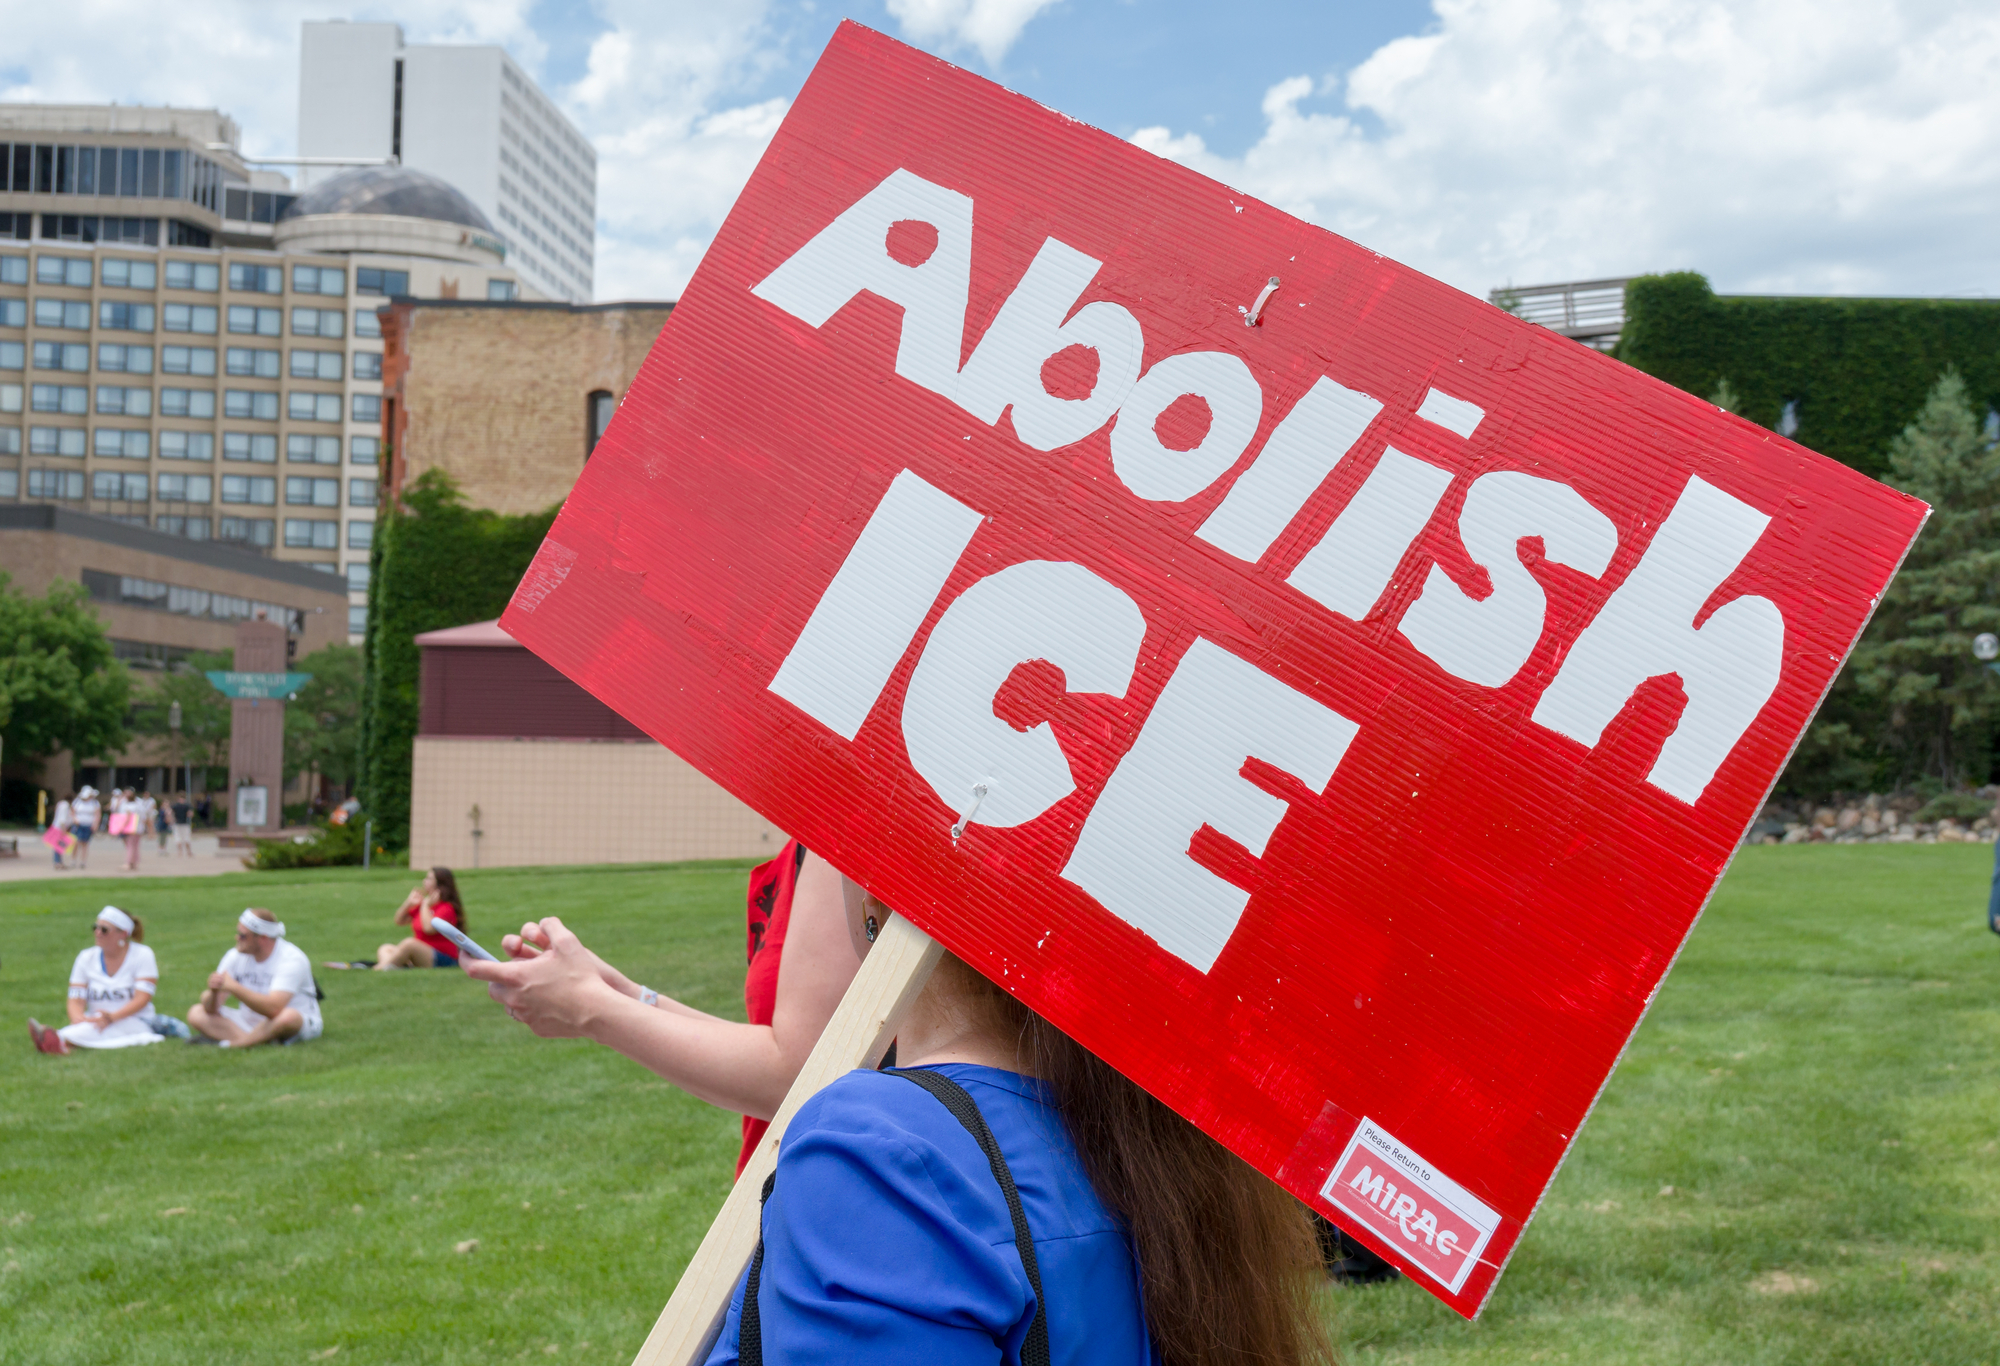 Medical experts have uncovered more evidence of sterilization practices on women held by ICE